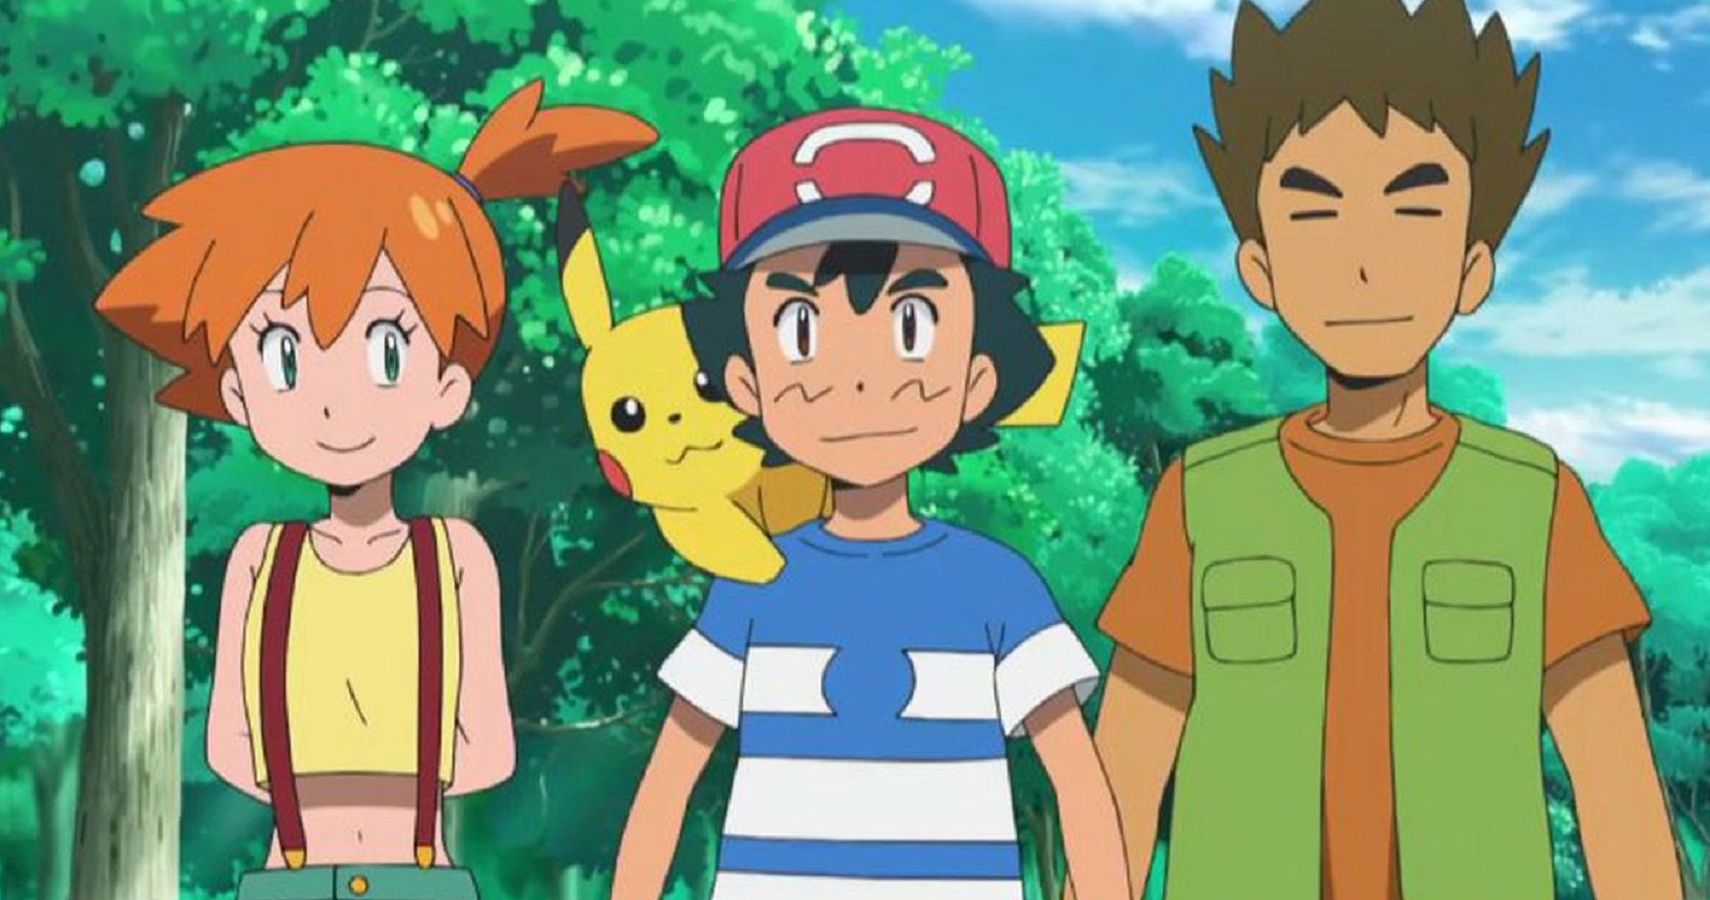 Pokémon Ranking Ash Ketchums 10 Best Friends From Worst To First.